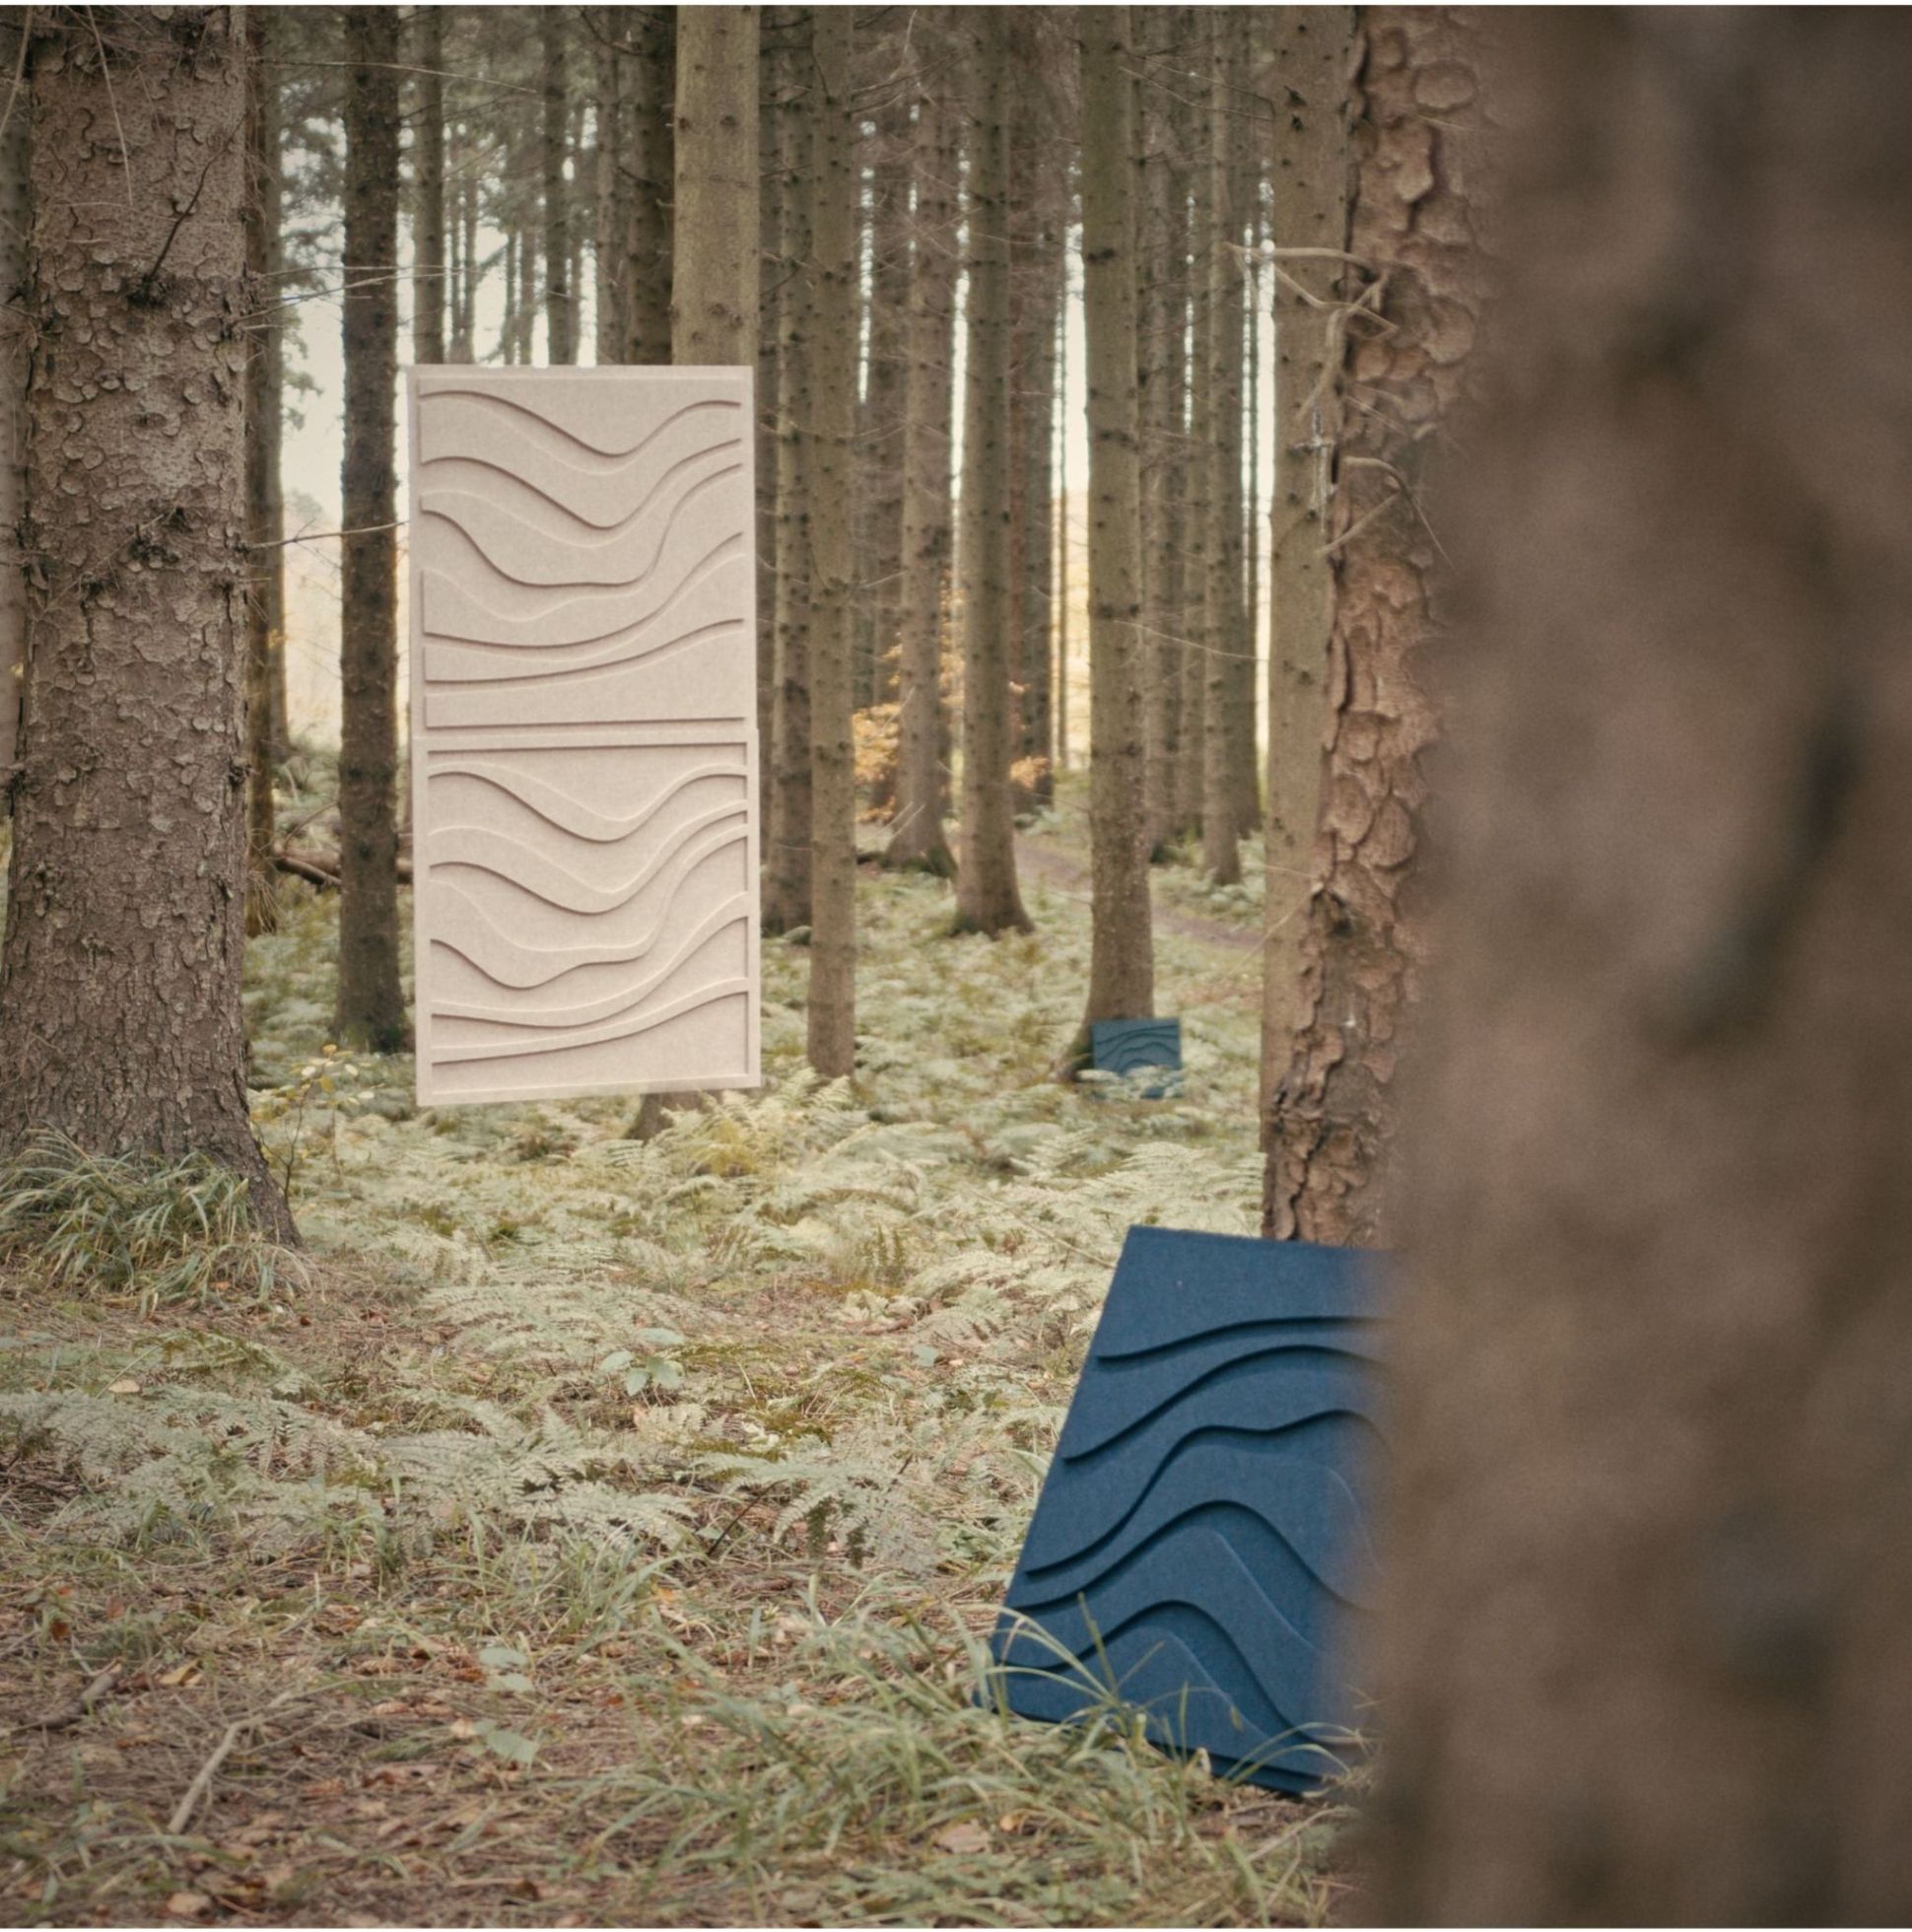 Wave tile set from Arturel displayed in a natural forest setting, showcasing sustainability and acoustic design